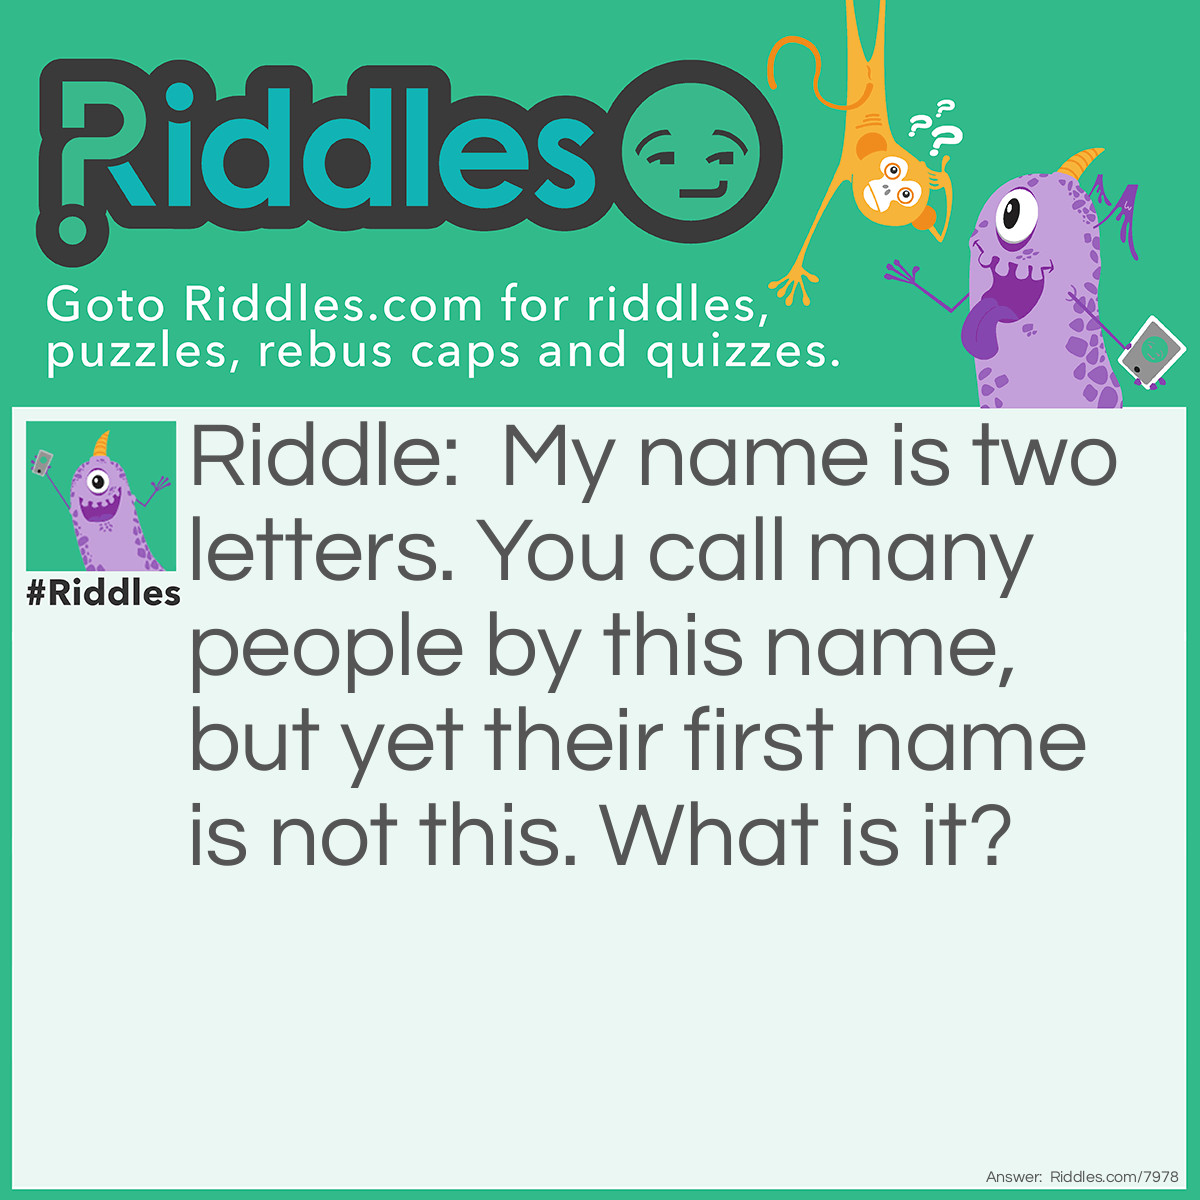 Riddle: My name is two letters. You call many people by this name, but yet their first name is not this. What is it? Answer: Mr.